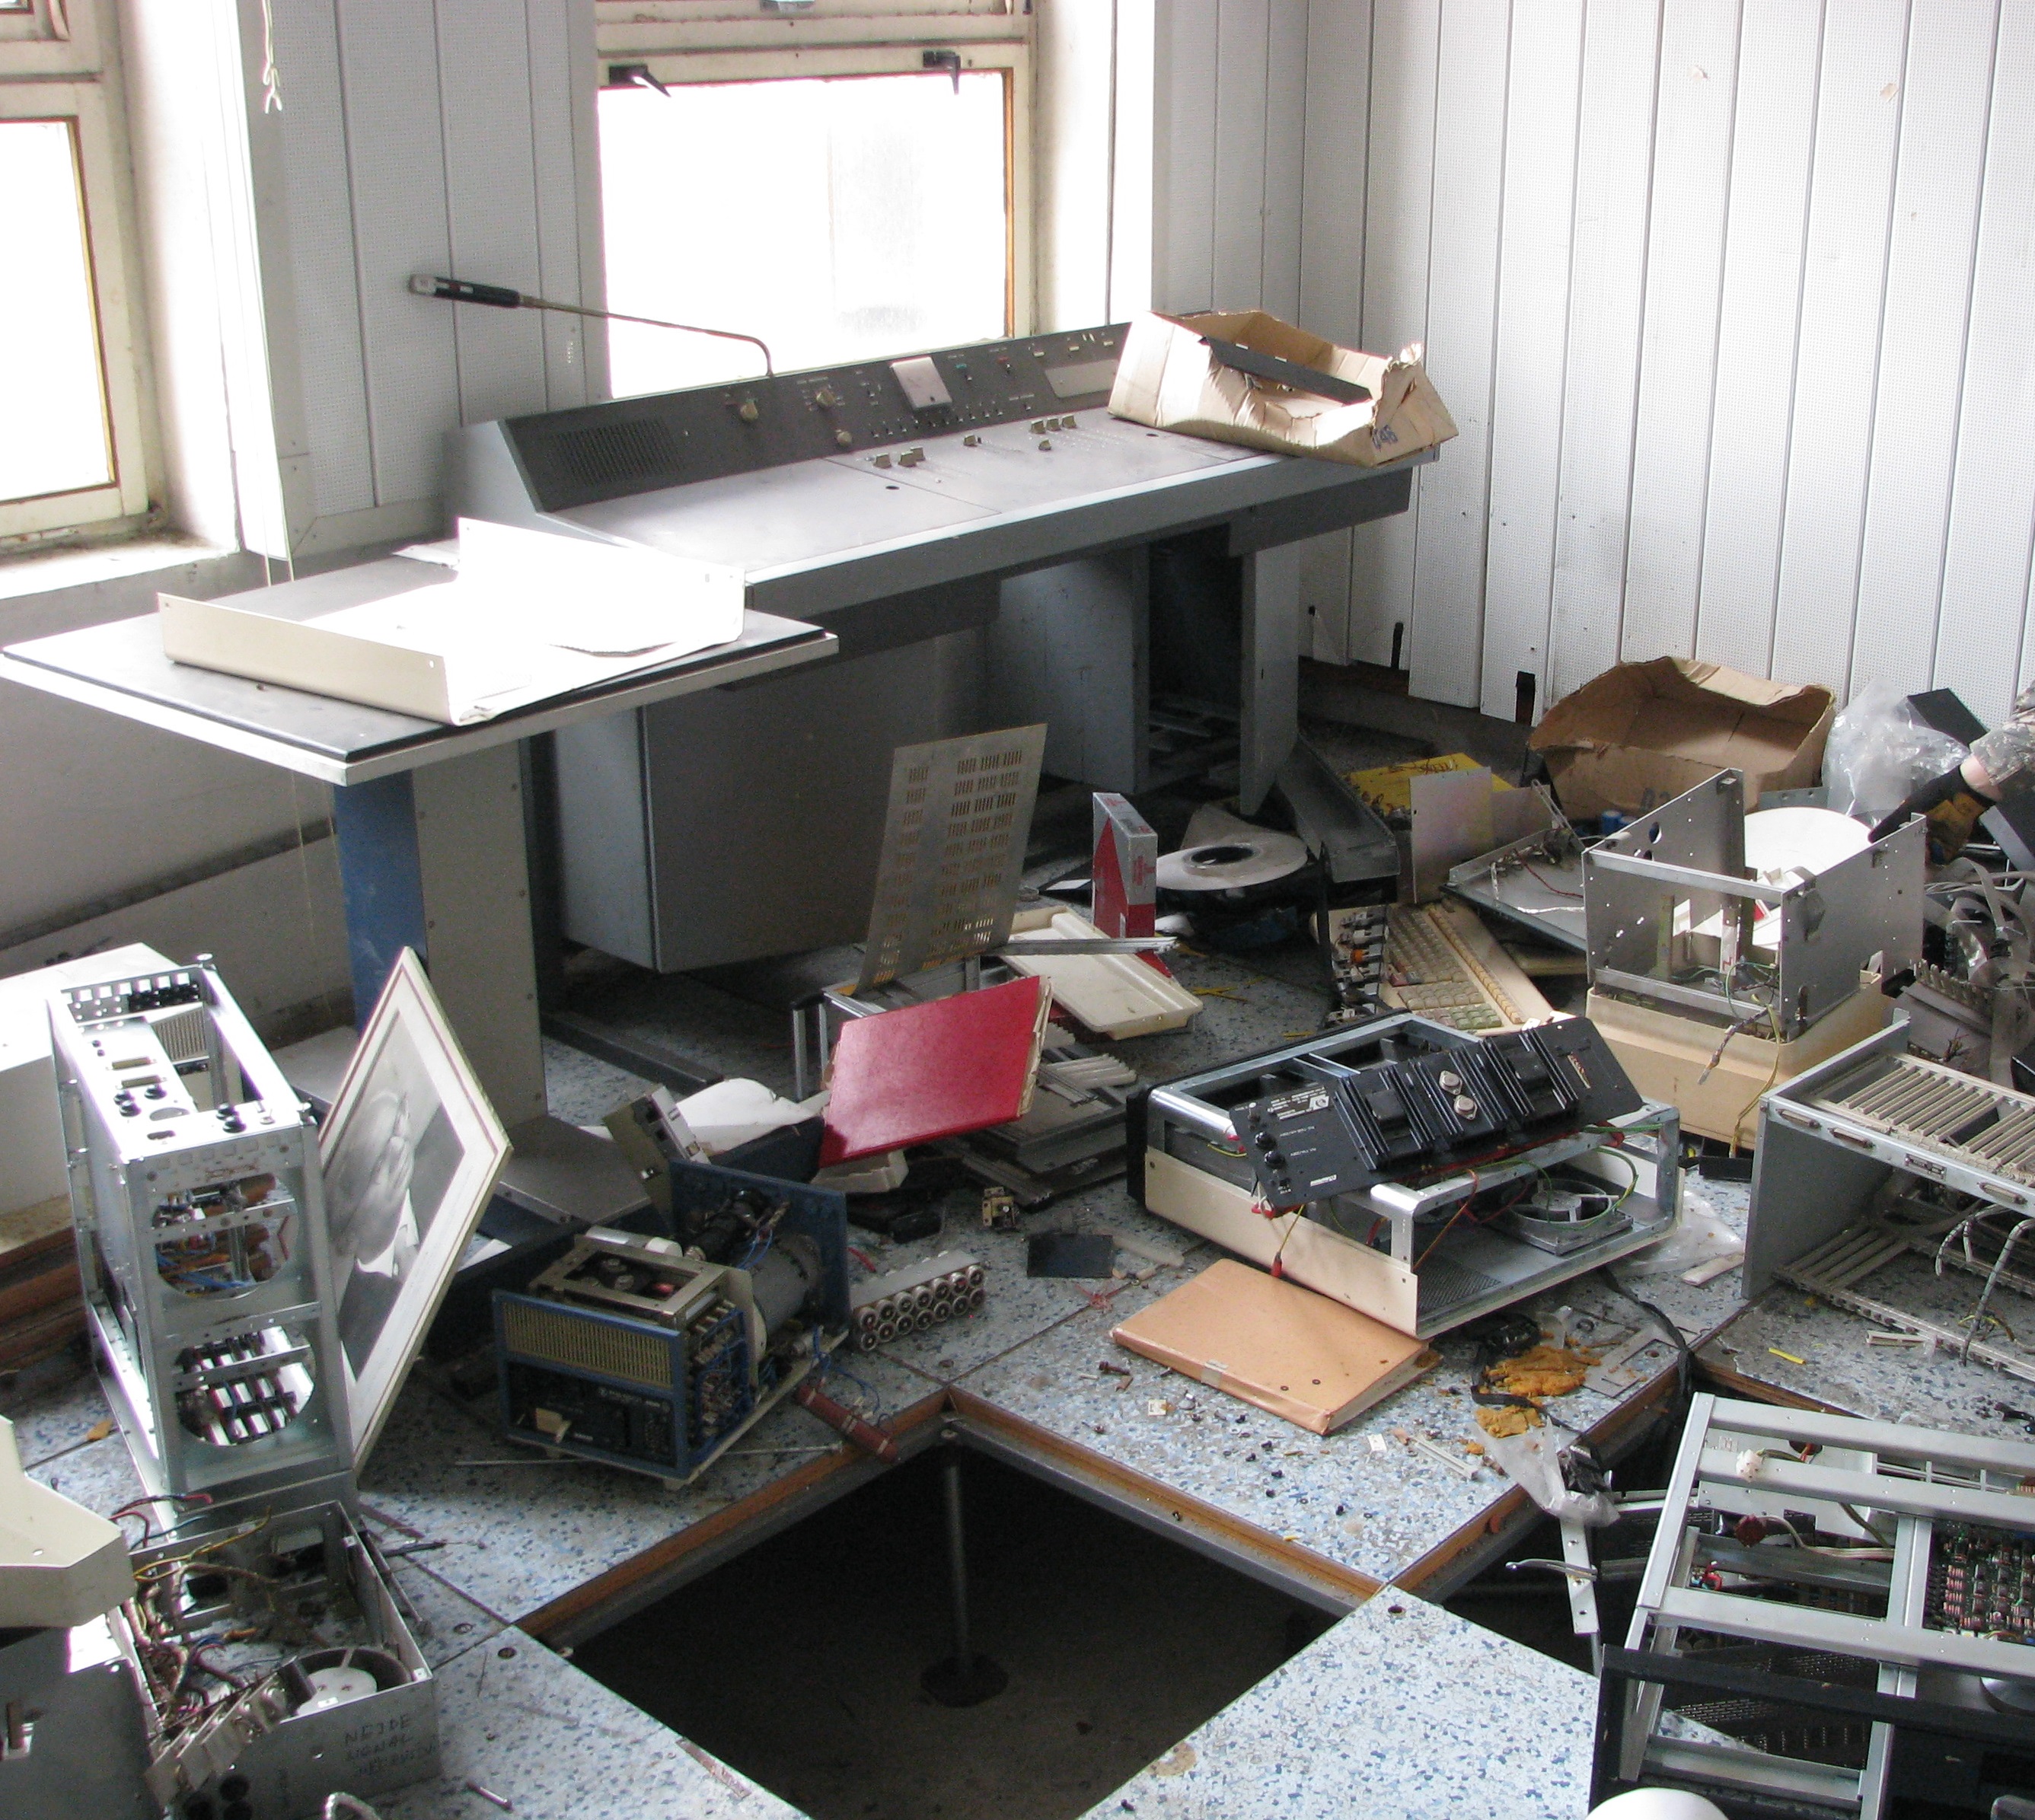 notice some terminal keyboard on the floor, this used to be a server room